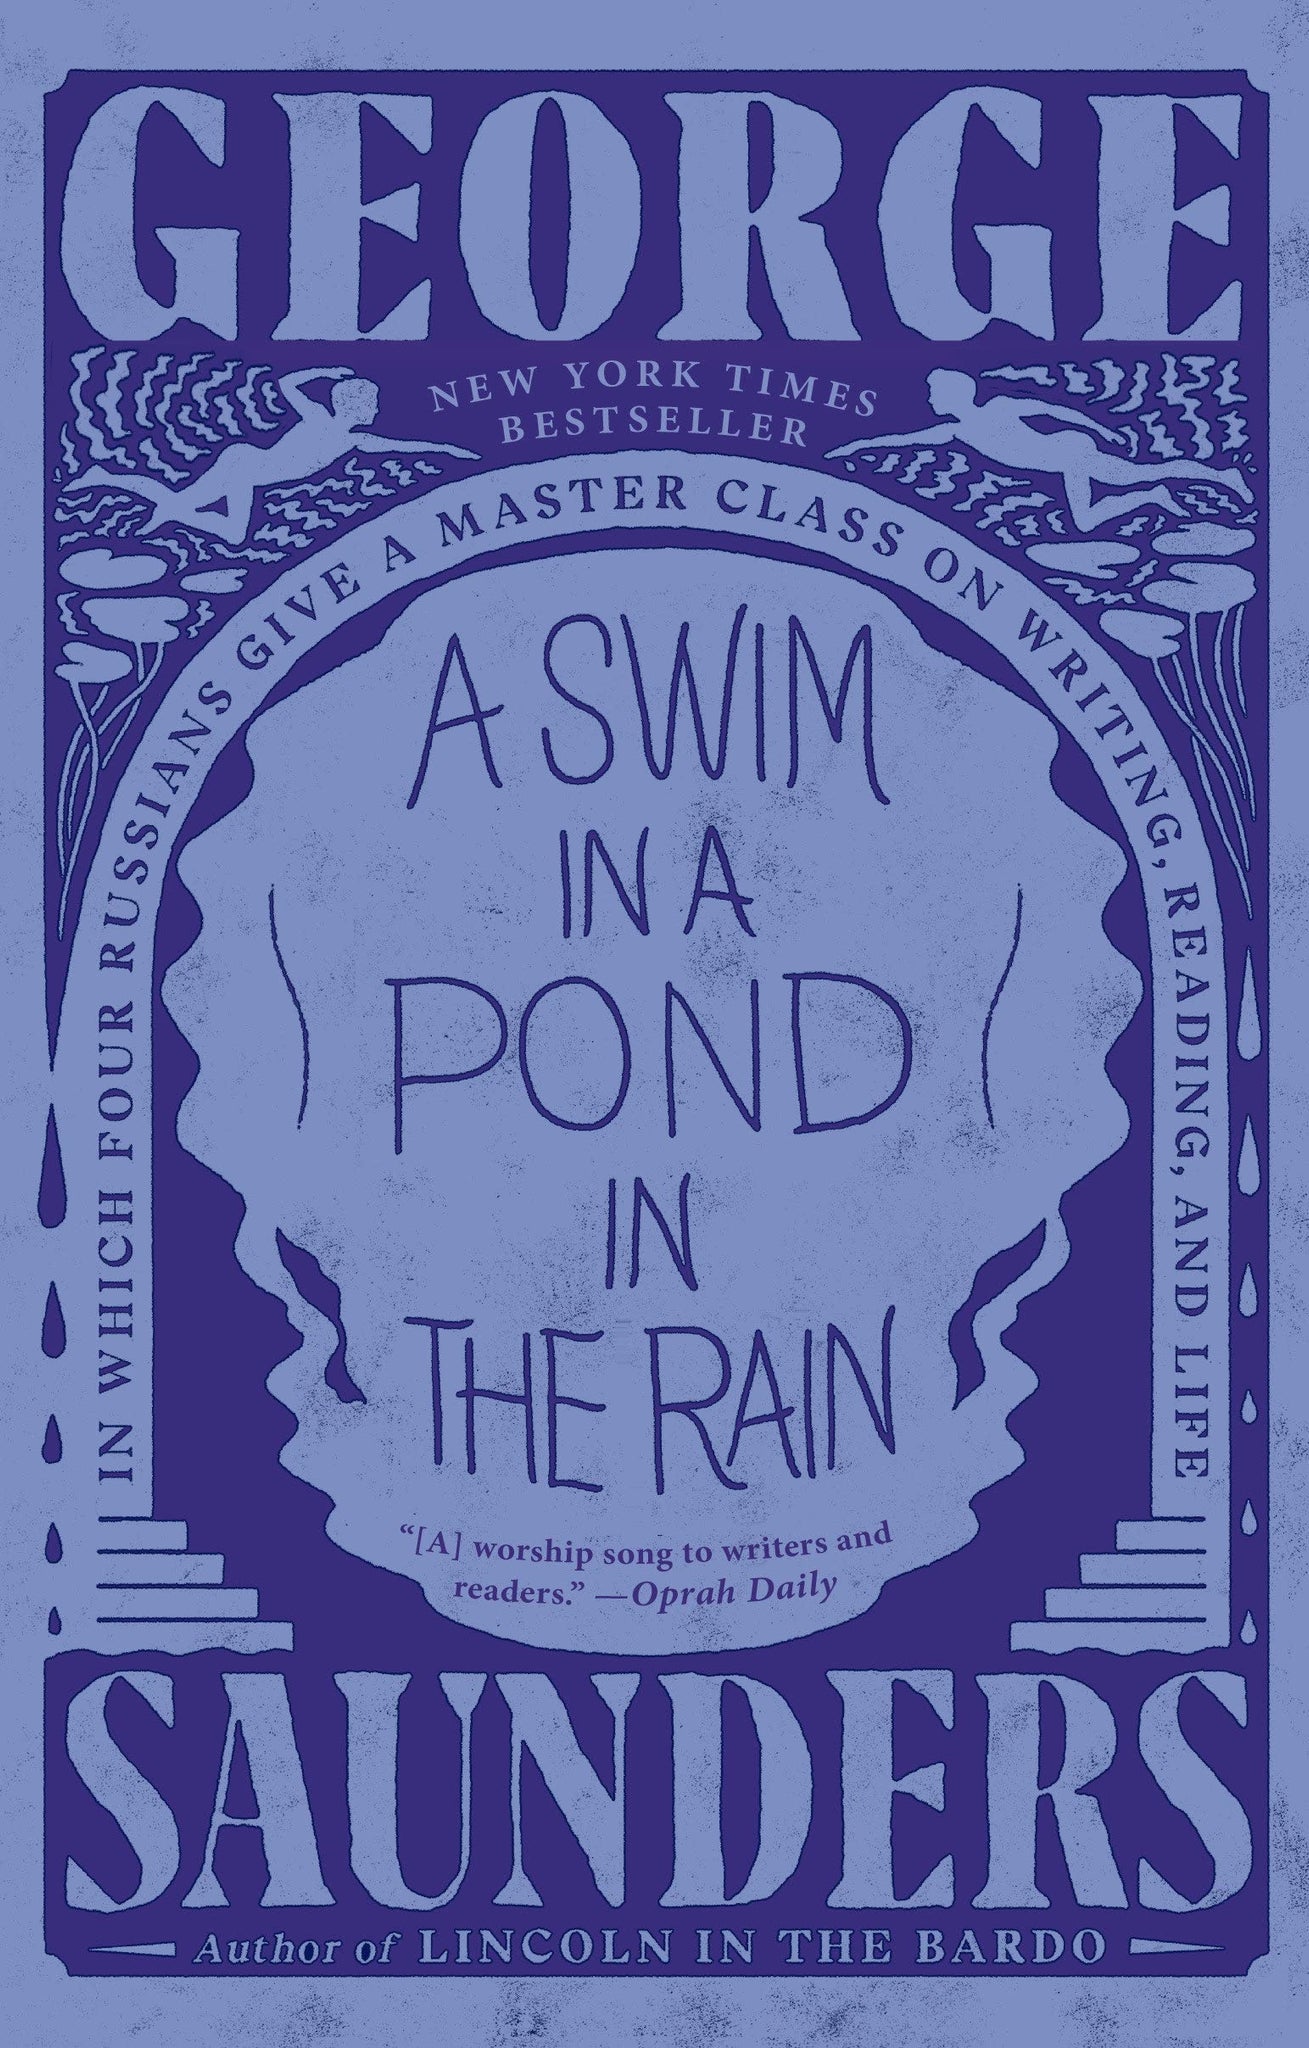 A Swim in a Pond in the Rain : In Which Four Russians Give a Master Class on Writing, Reading & Life by George Saunders